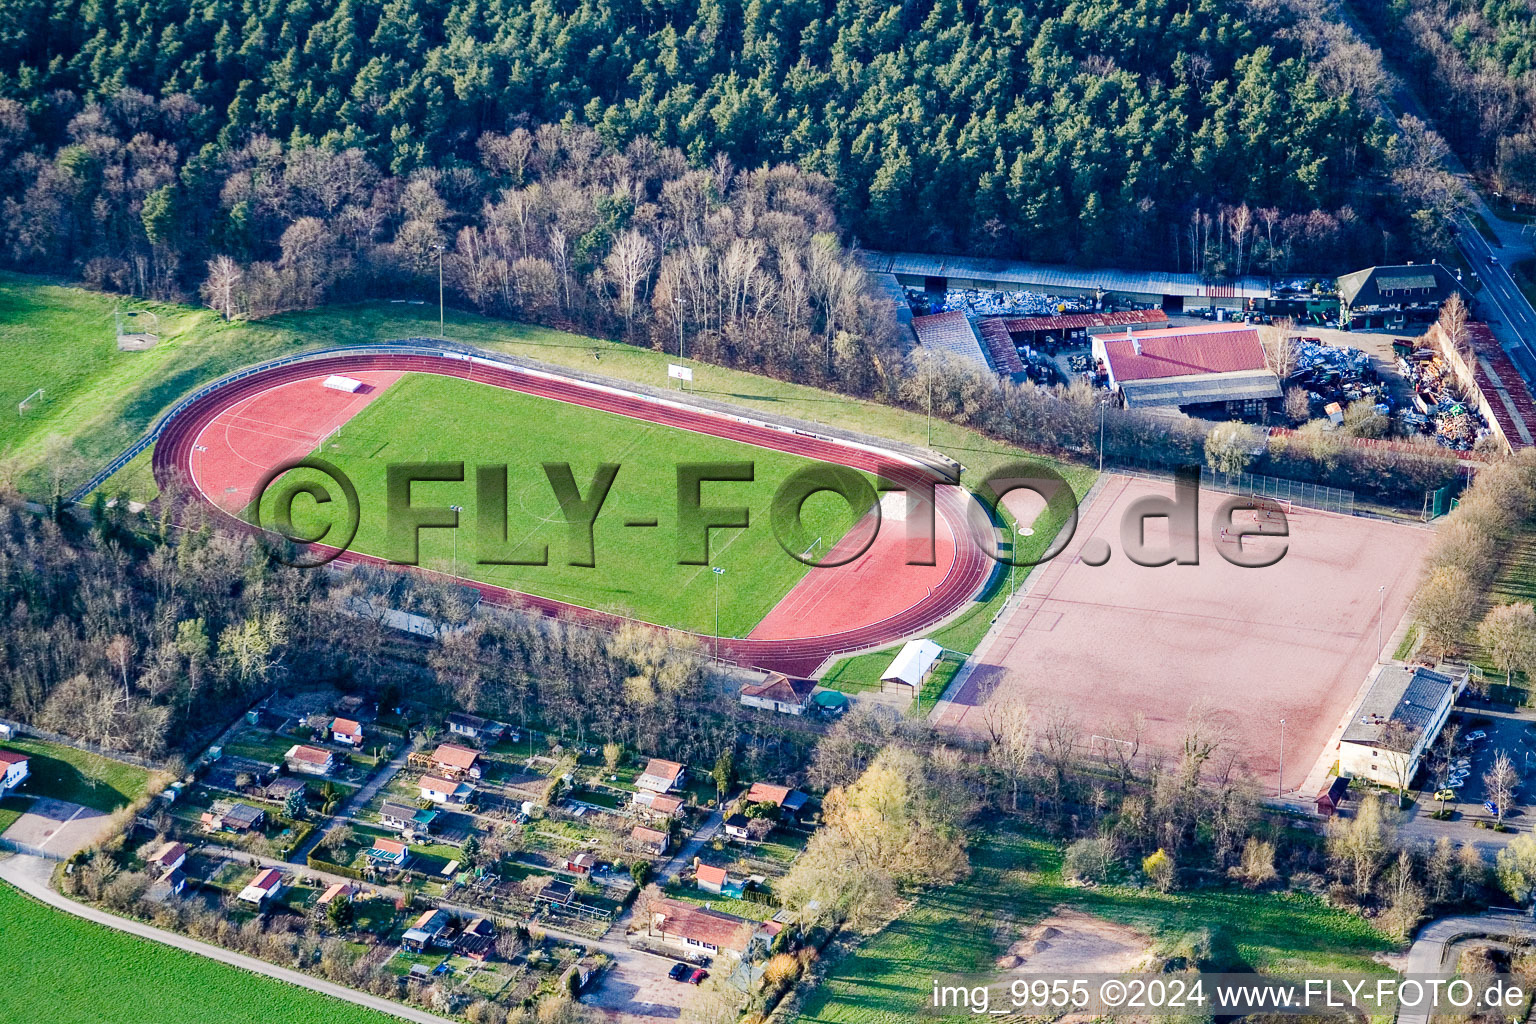 Ensemble of sports grounds of the FC Phoenix Bellheim e.V. Franz-Hage stadium in the district Sondernheim in Bellheim in the state Rhineland-Palatinate